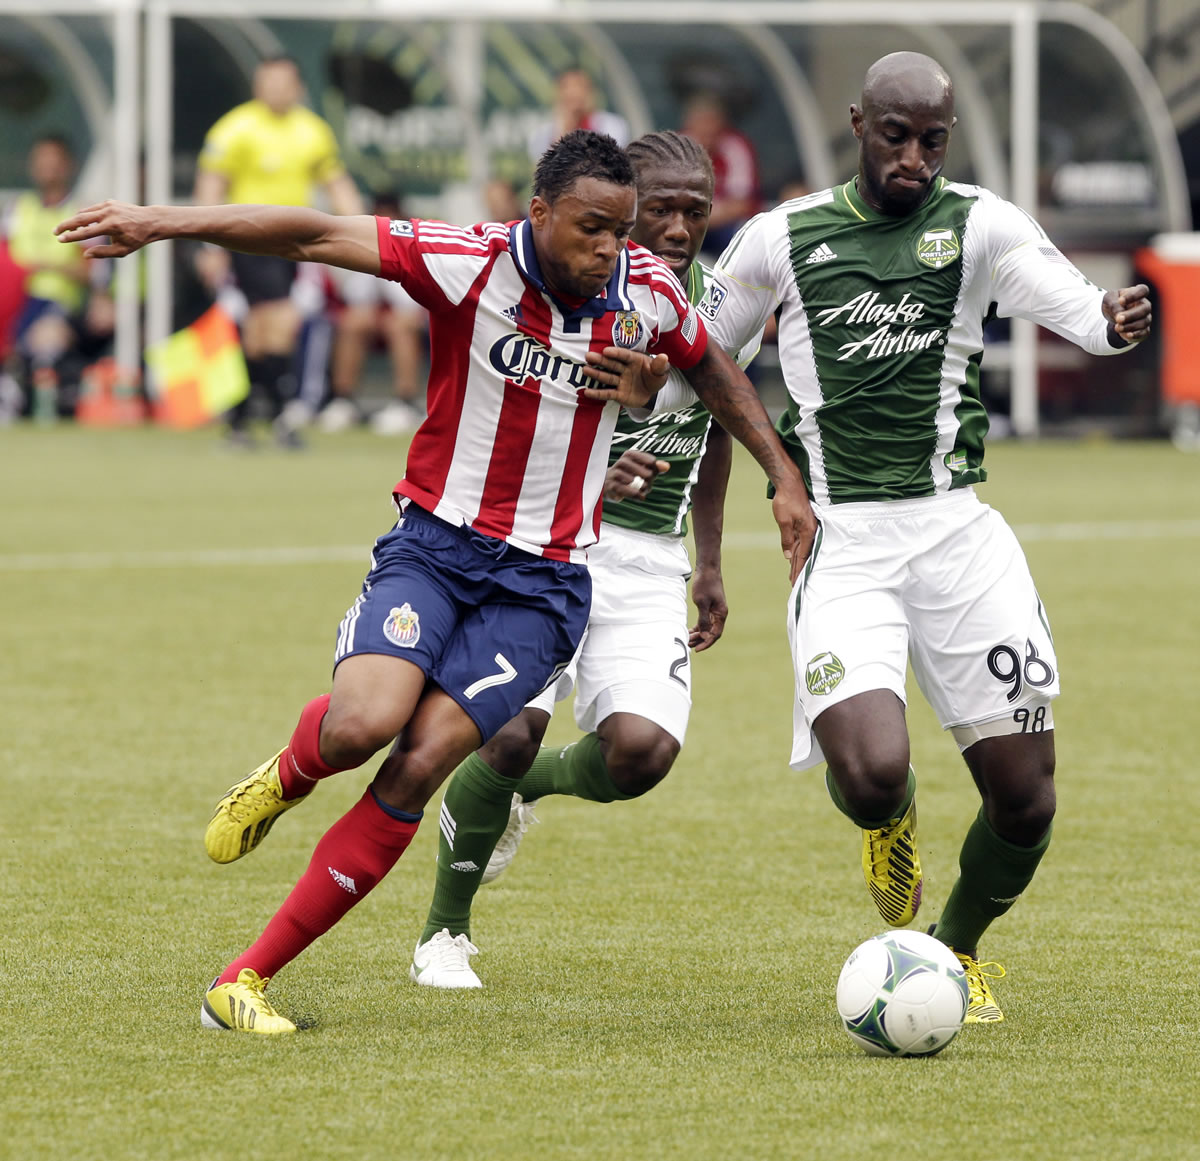 Chivas USA forward Tristan Bowen, Bowen, left, and Portland Timbers defender Mamadou Danso, right, chase down the ball as Timbers midfielder Diego Chara follows close behind during the first half Sunday.